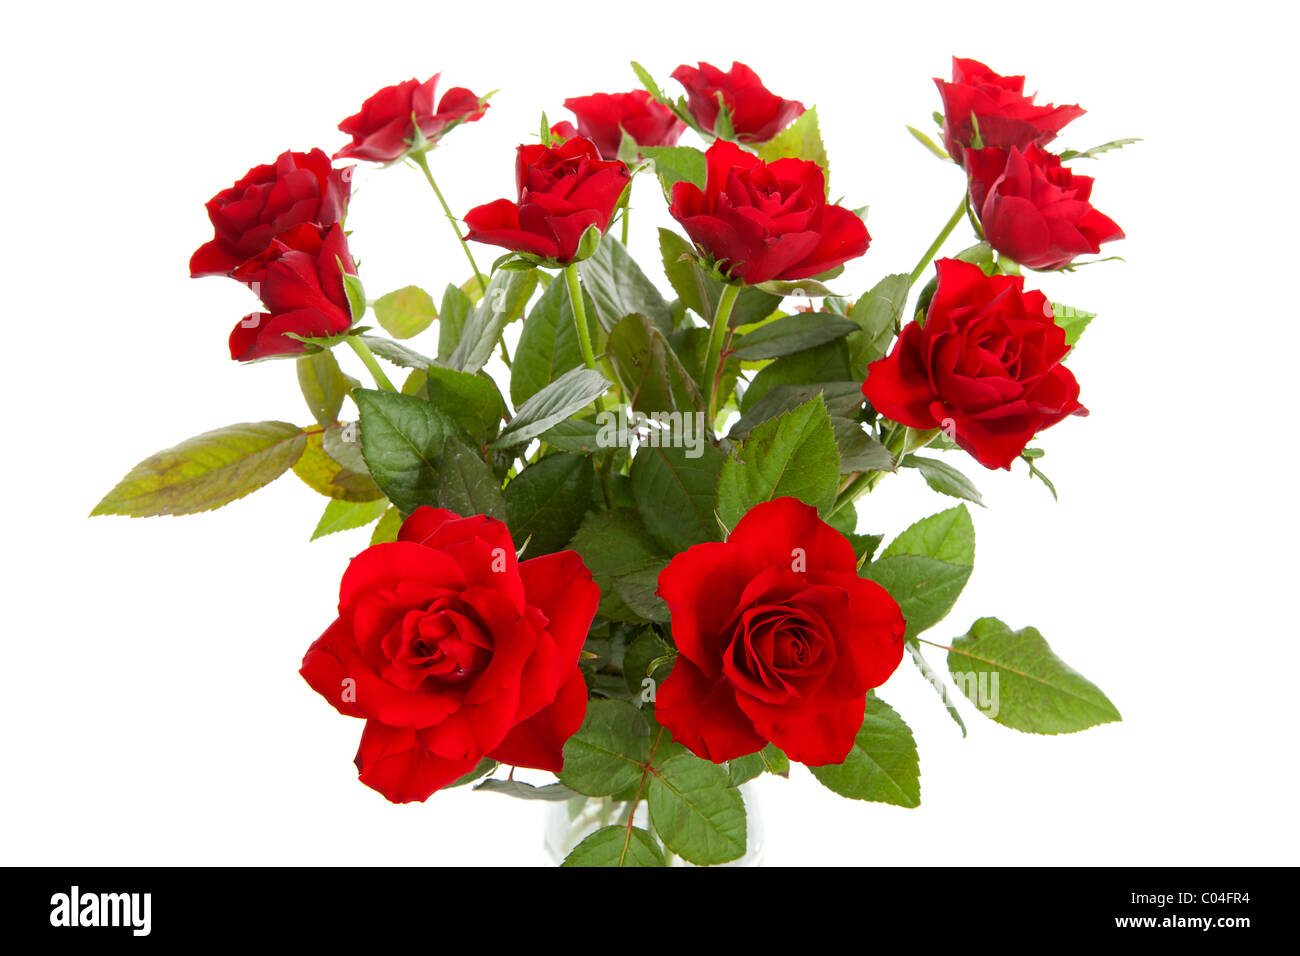 Bouquet of red roses in closeup over white background Stock Photo